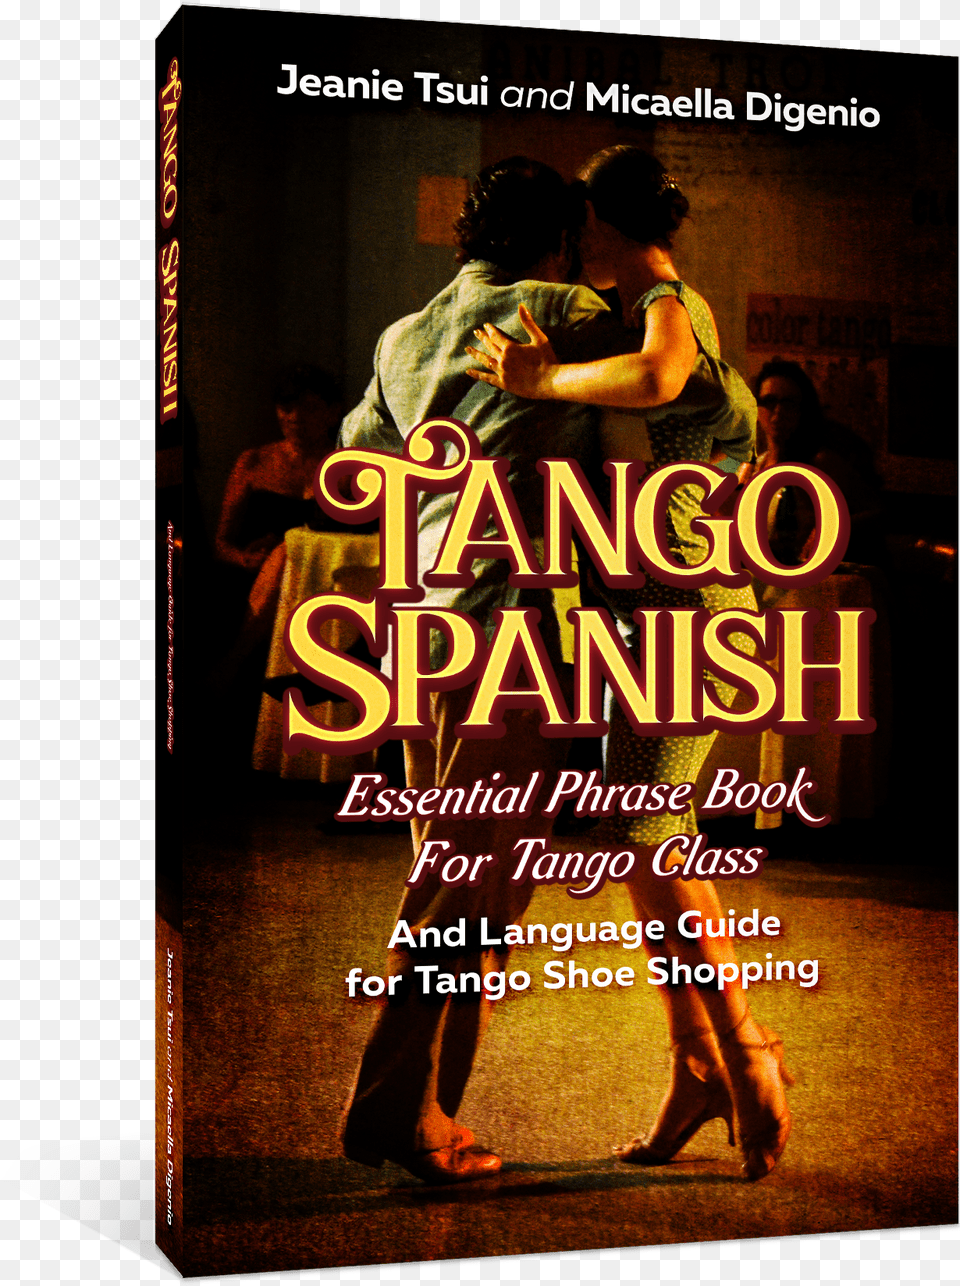 Tango Spanish Essential Phrase Book For Tango Class Flyer, Leisure Activities, Person, Dancing, Adult Png